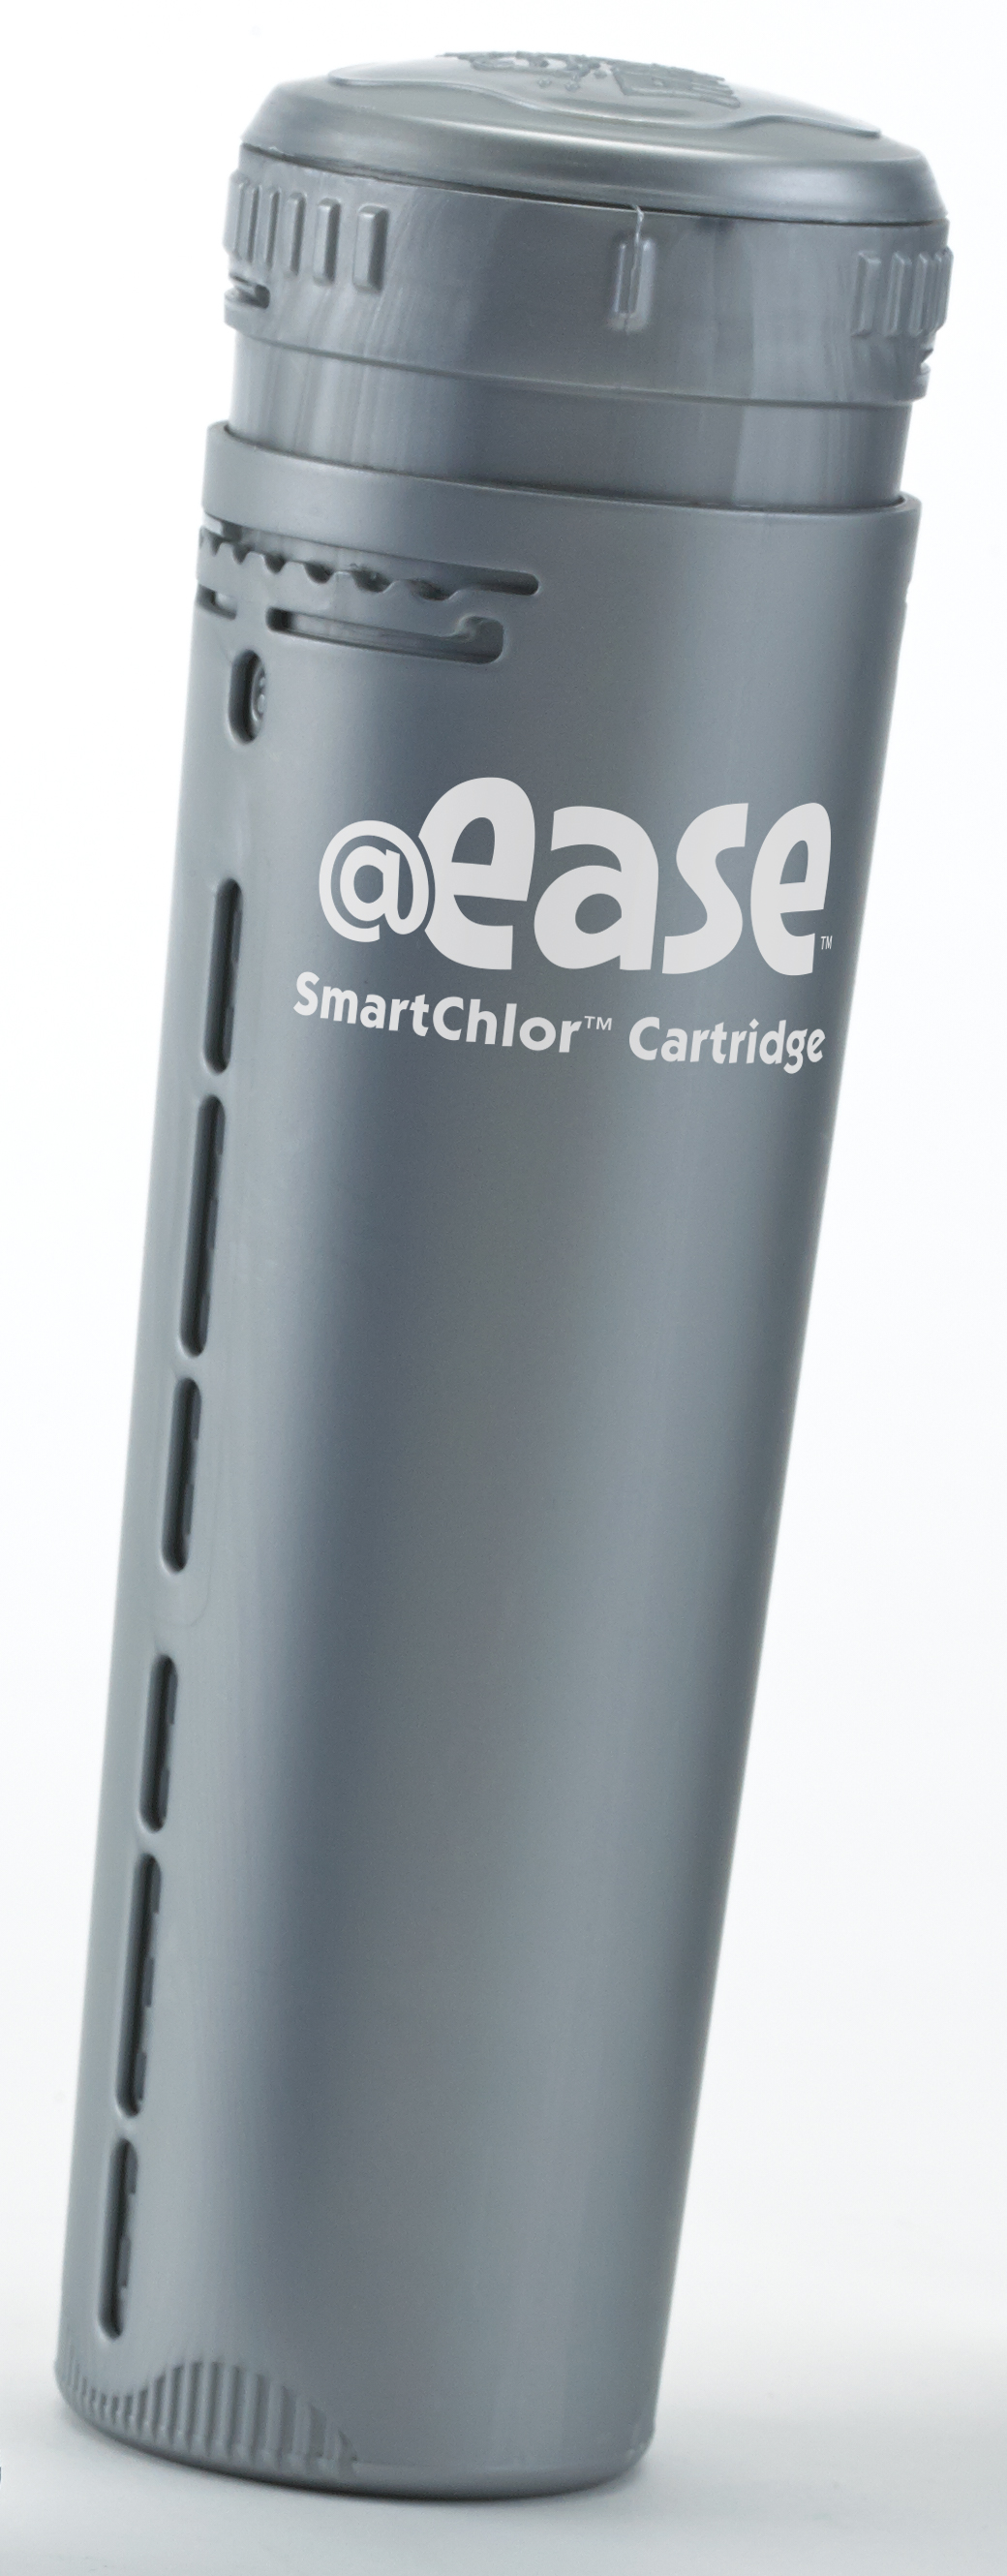 Frog @ease Smart Clhor In Line Replacement Cartridge